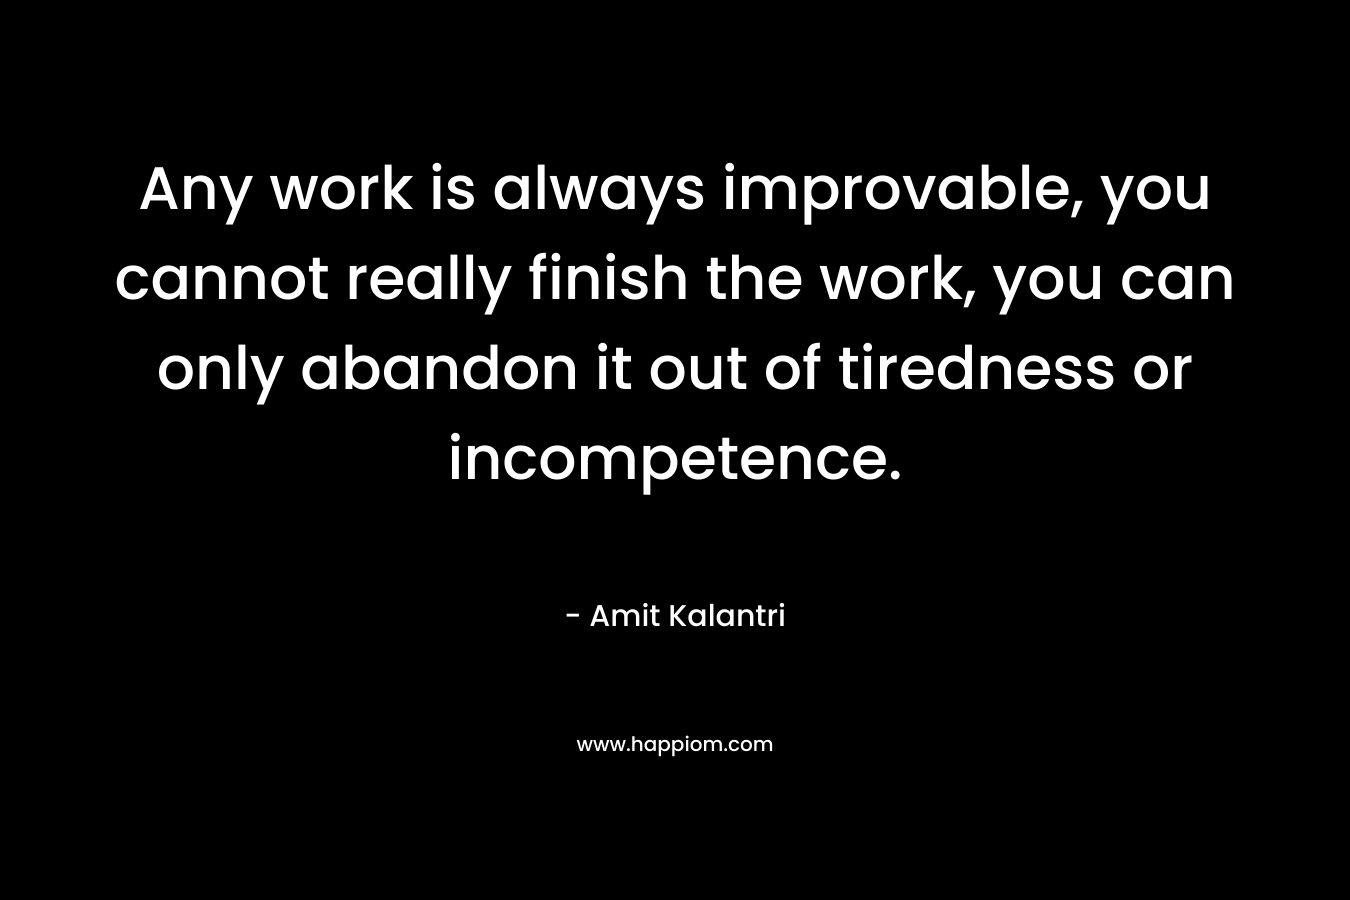 Any work is always improvable, you cannot really finish the work, you can only abandon it out of tiredness or incompetence. – Amit Kalantri